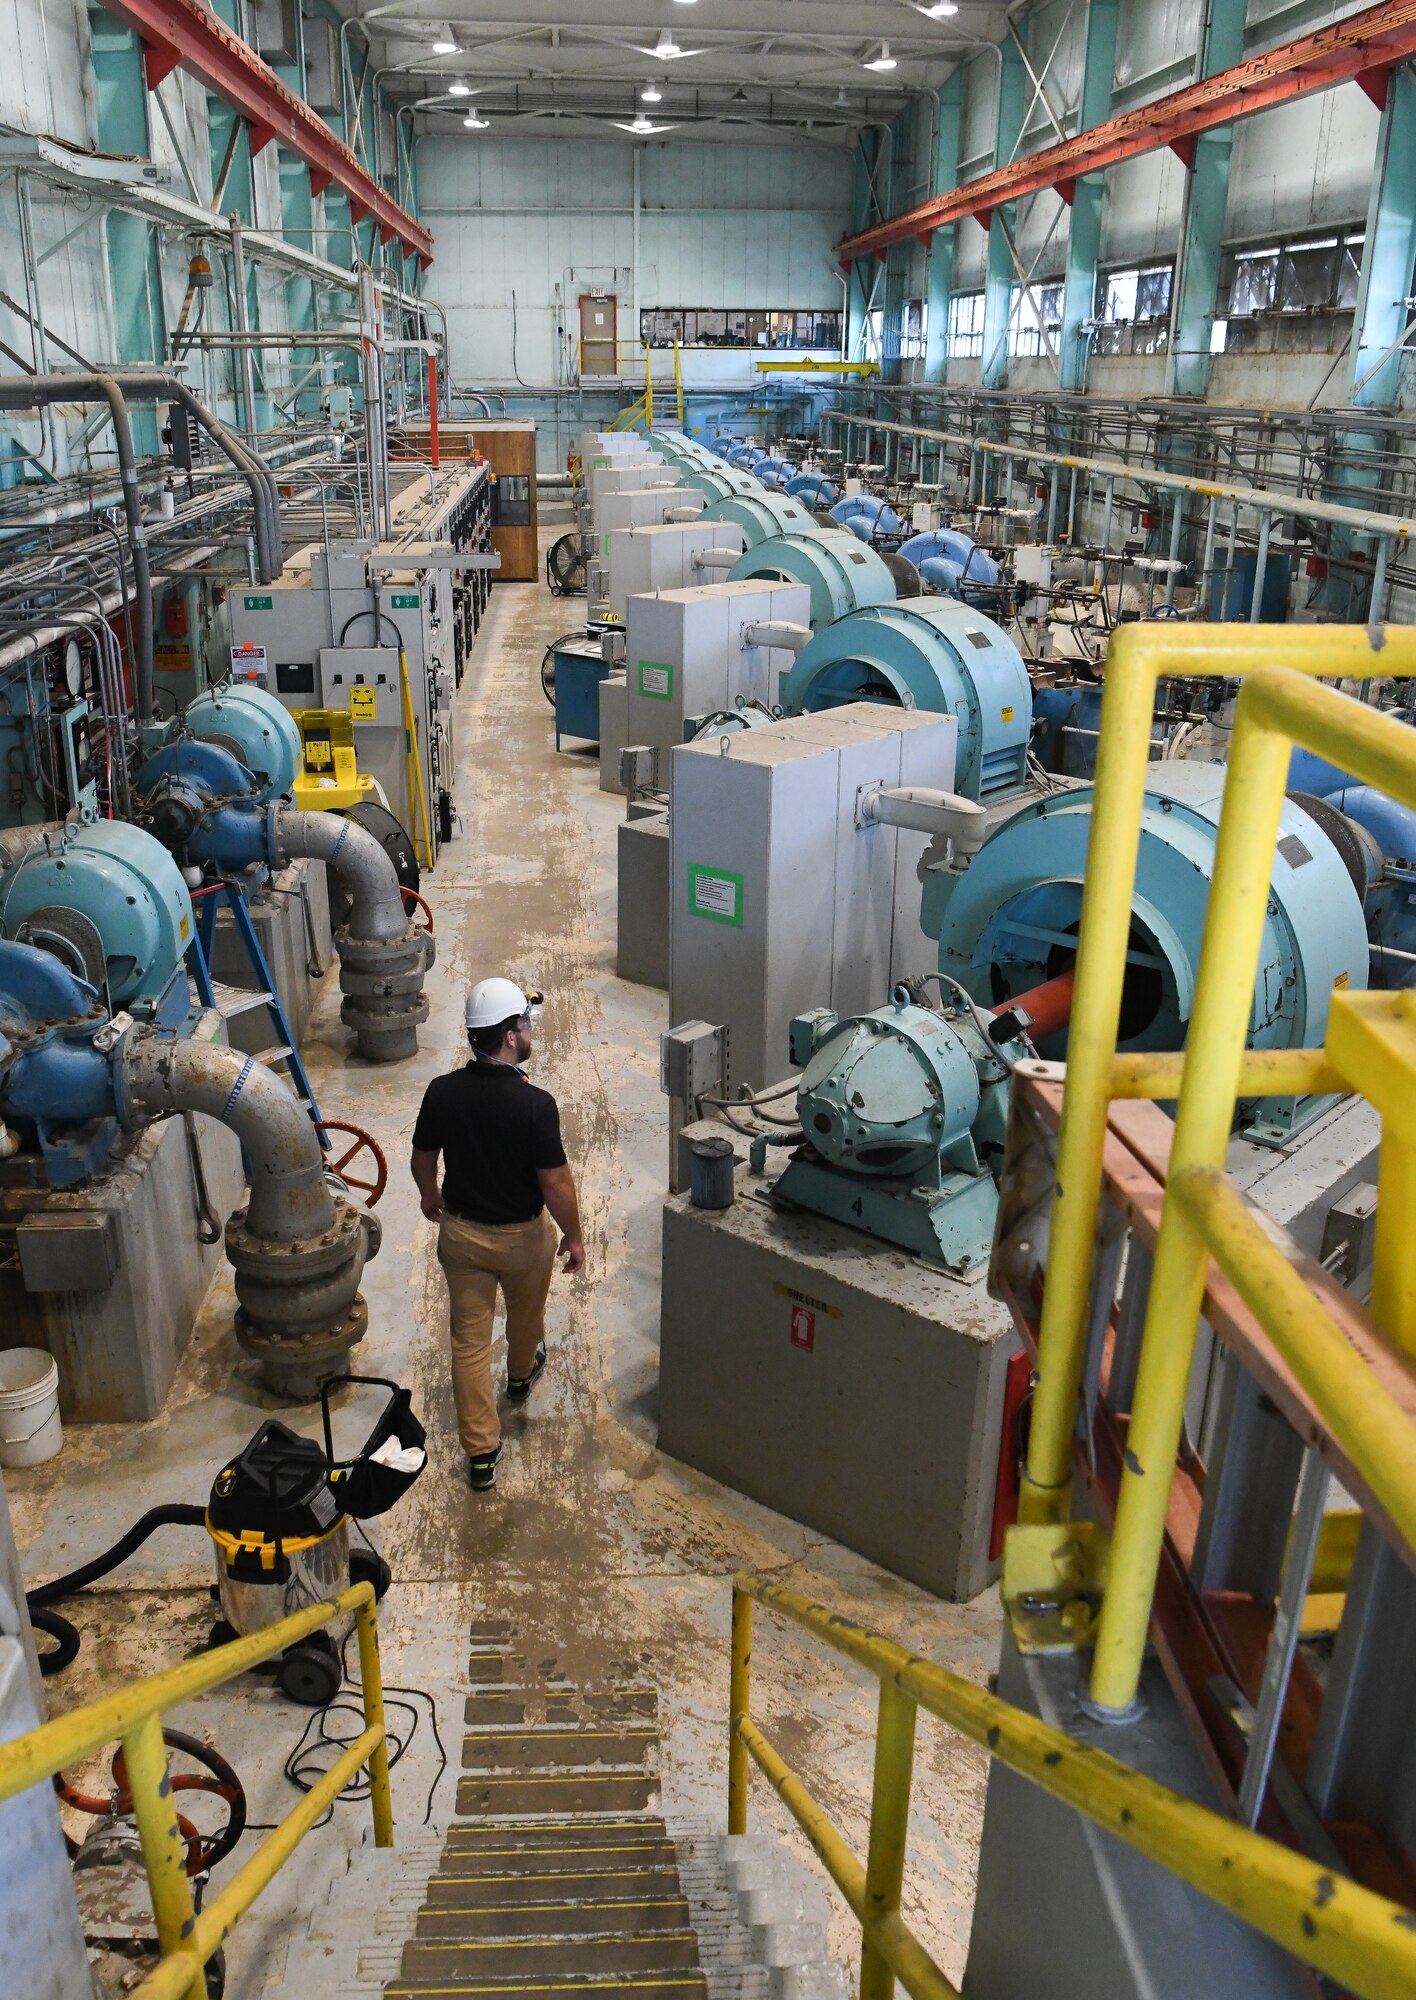 Joshua Cooke, an Arnold Engineering Development Complex senior utility manager, inspects a water pumping station, Sept. 10, 2020, at Arnold Air Force Base, Tenn. The AEDC Base Civil Engineering Branch oversees utilities at Arnold AFB. (U.S. Air Force photo by Jill Pickett)